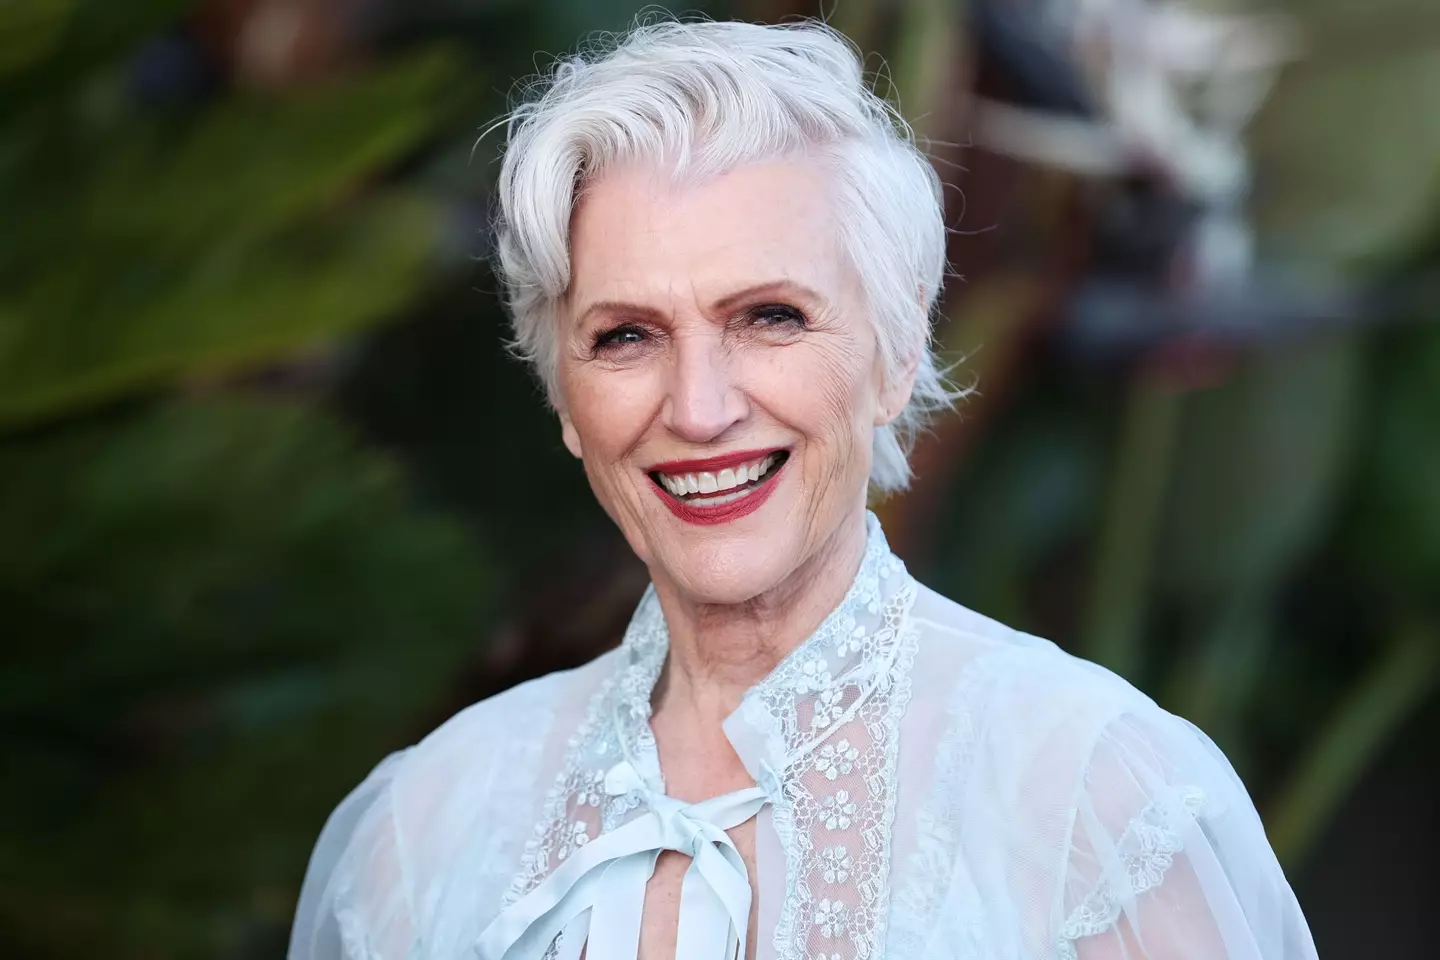 Elon Musk's mother, Maye Musk, is the next Sports Illustrated Swimsuit's cover model.